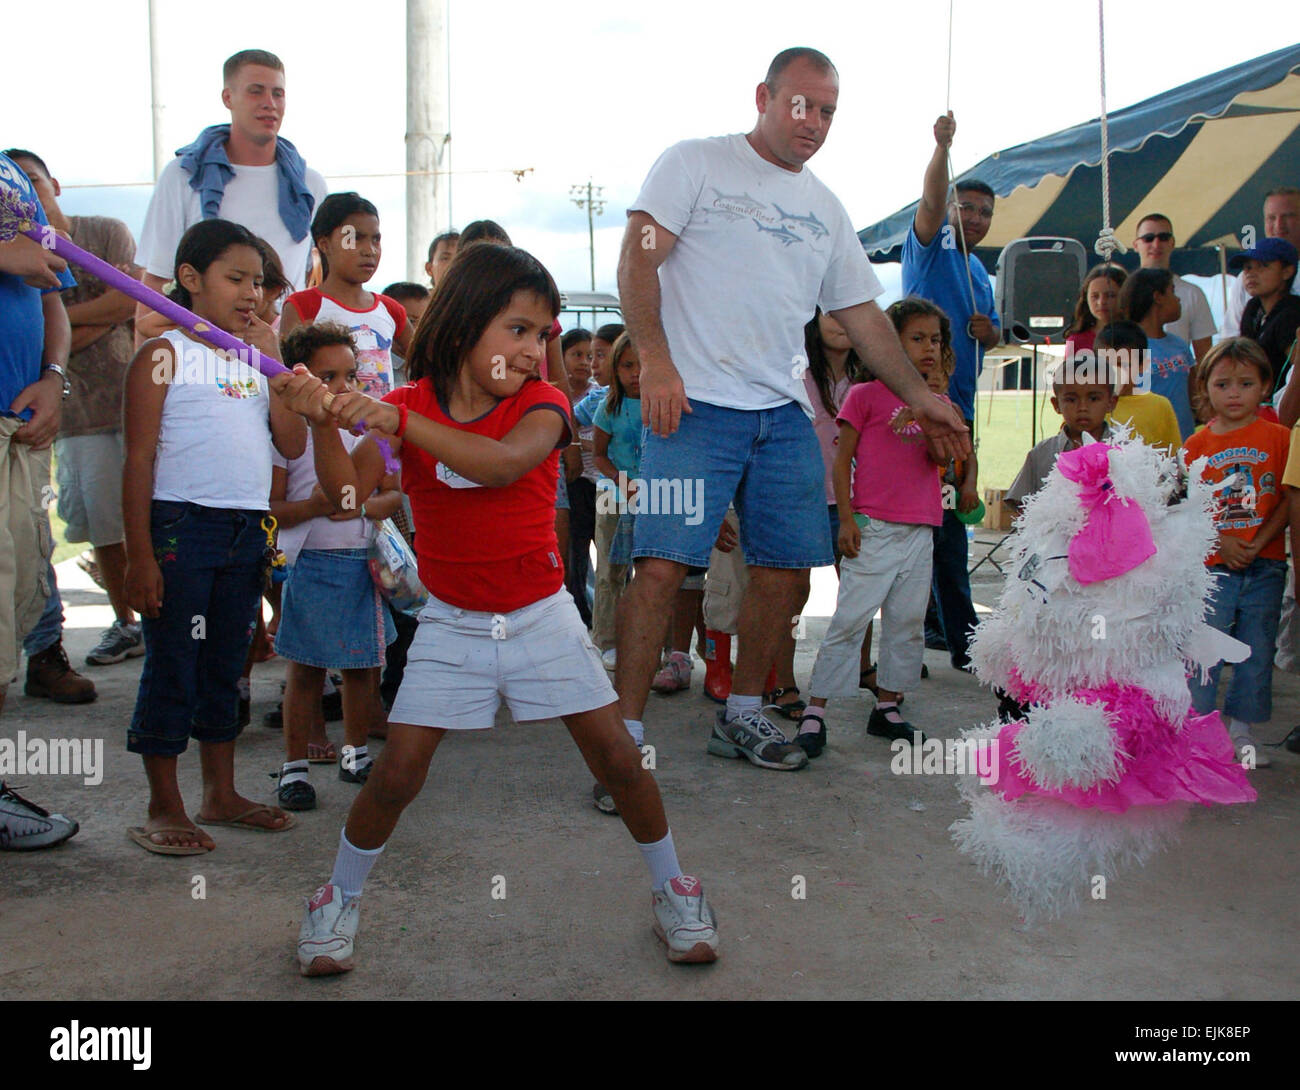 A young Honduran girl winds up to deliver a crushing blow to a pinata while her friends cheer her on at Soto Cano Air Base, Honduras, Sept. 22, 2007. Approximately 90 children from Nuestra Senora de Guadalupe Children's Home in Comayagua came out to enjoy the Annual Kids Day celebration.   Staff Sgt. Austin M. May Stock Photo